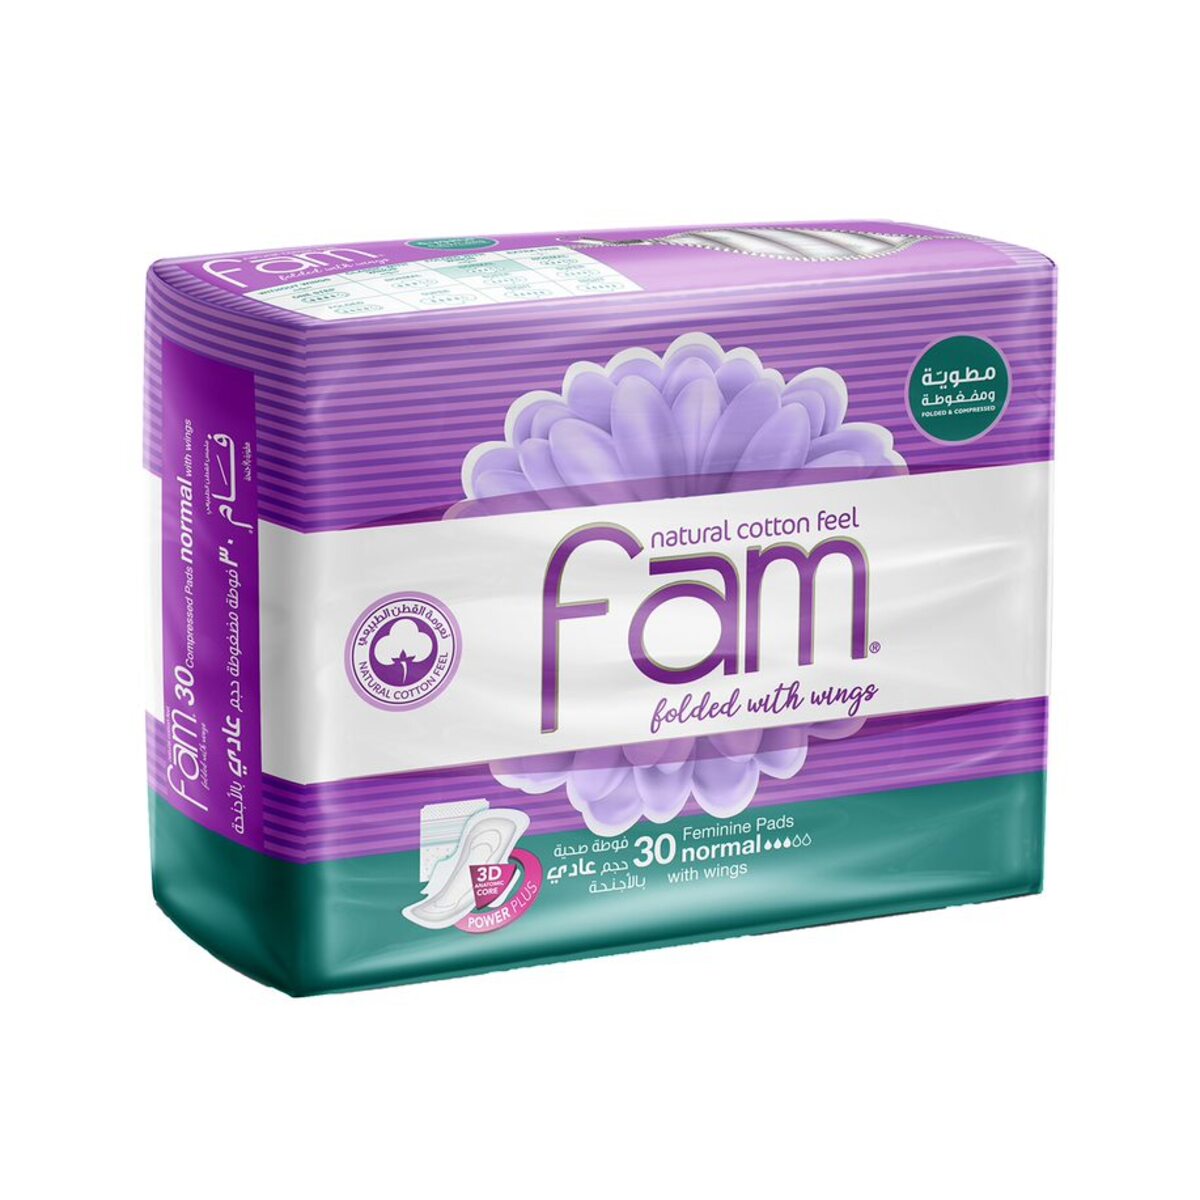 Fam Natural Cotton Feel Maxi Thick Folded with Wings Normal Sanitary Pads 30 pcs